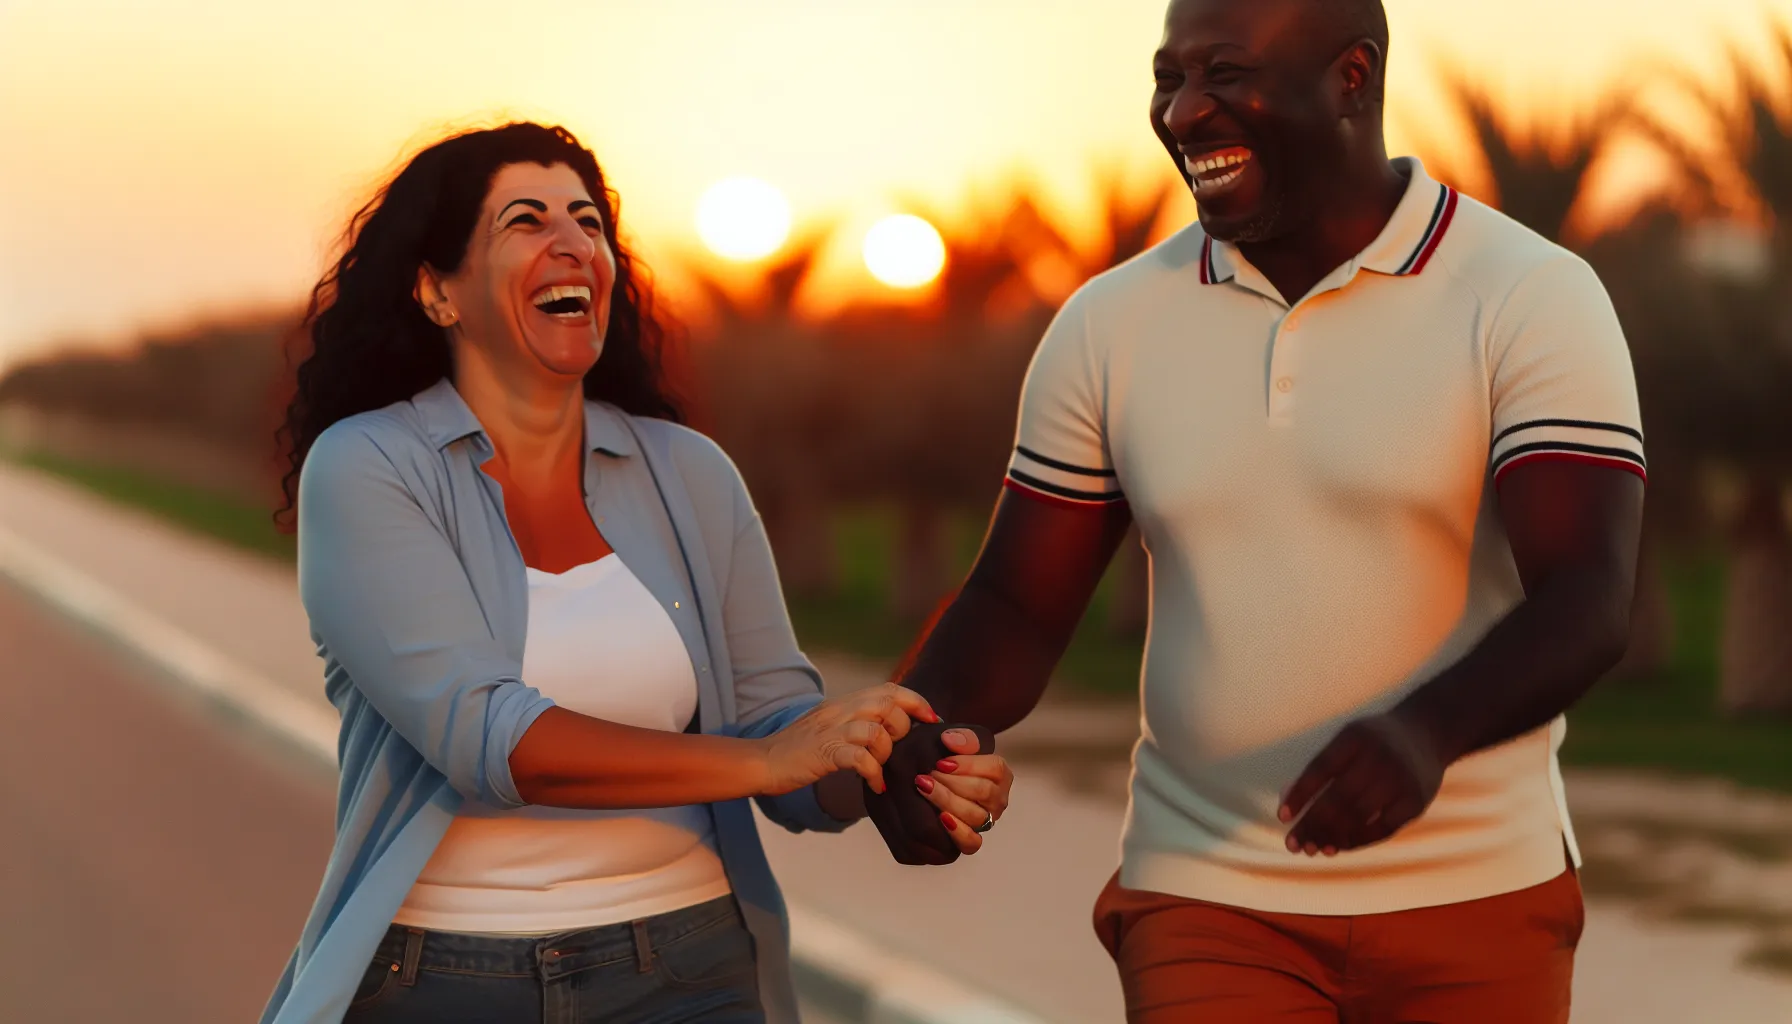 Mature couple on a sunset walk, embodying joy and connection